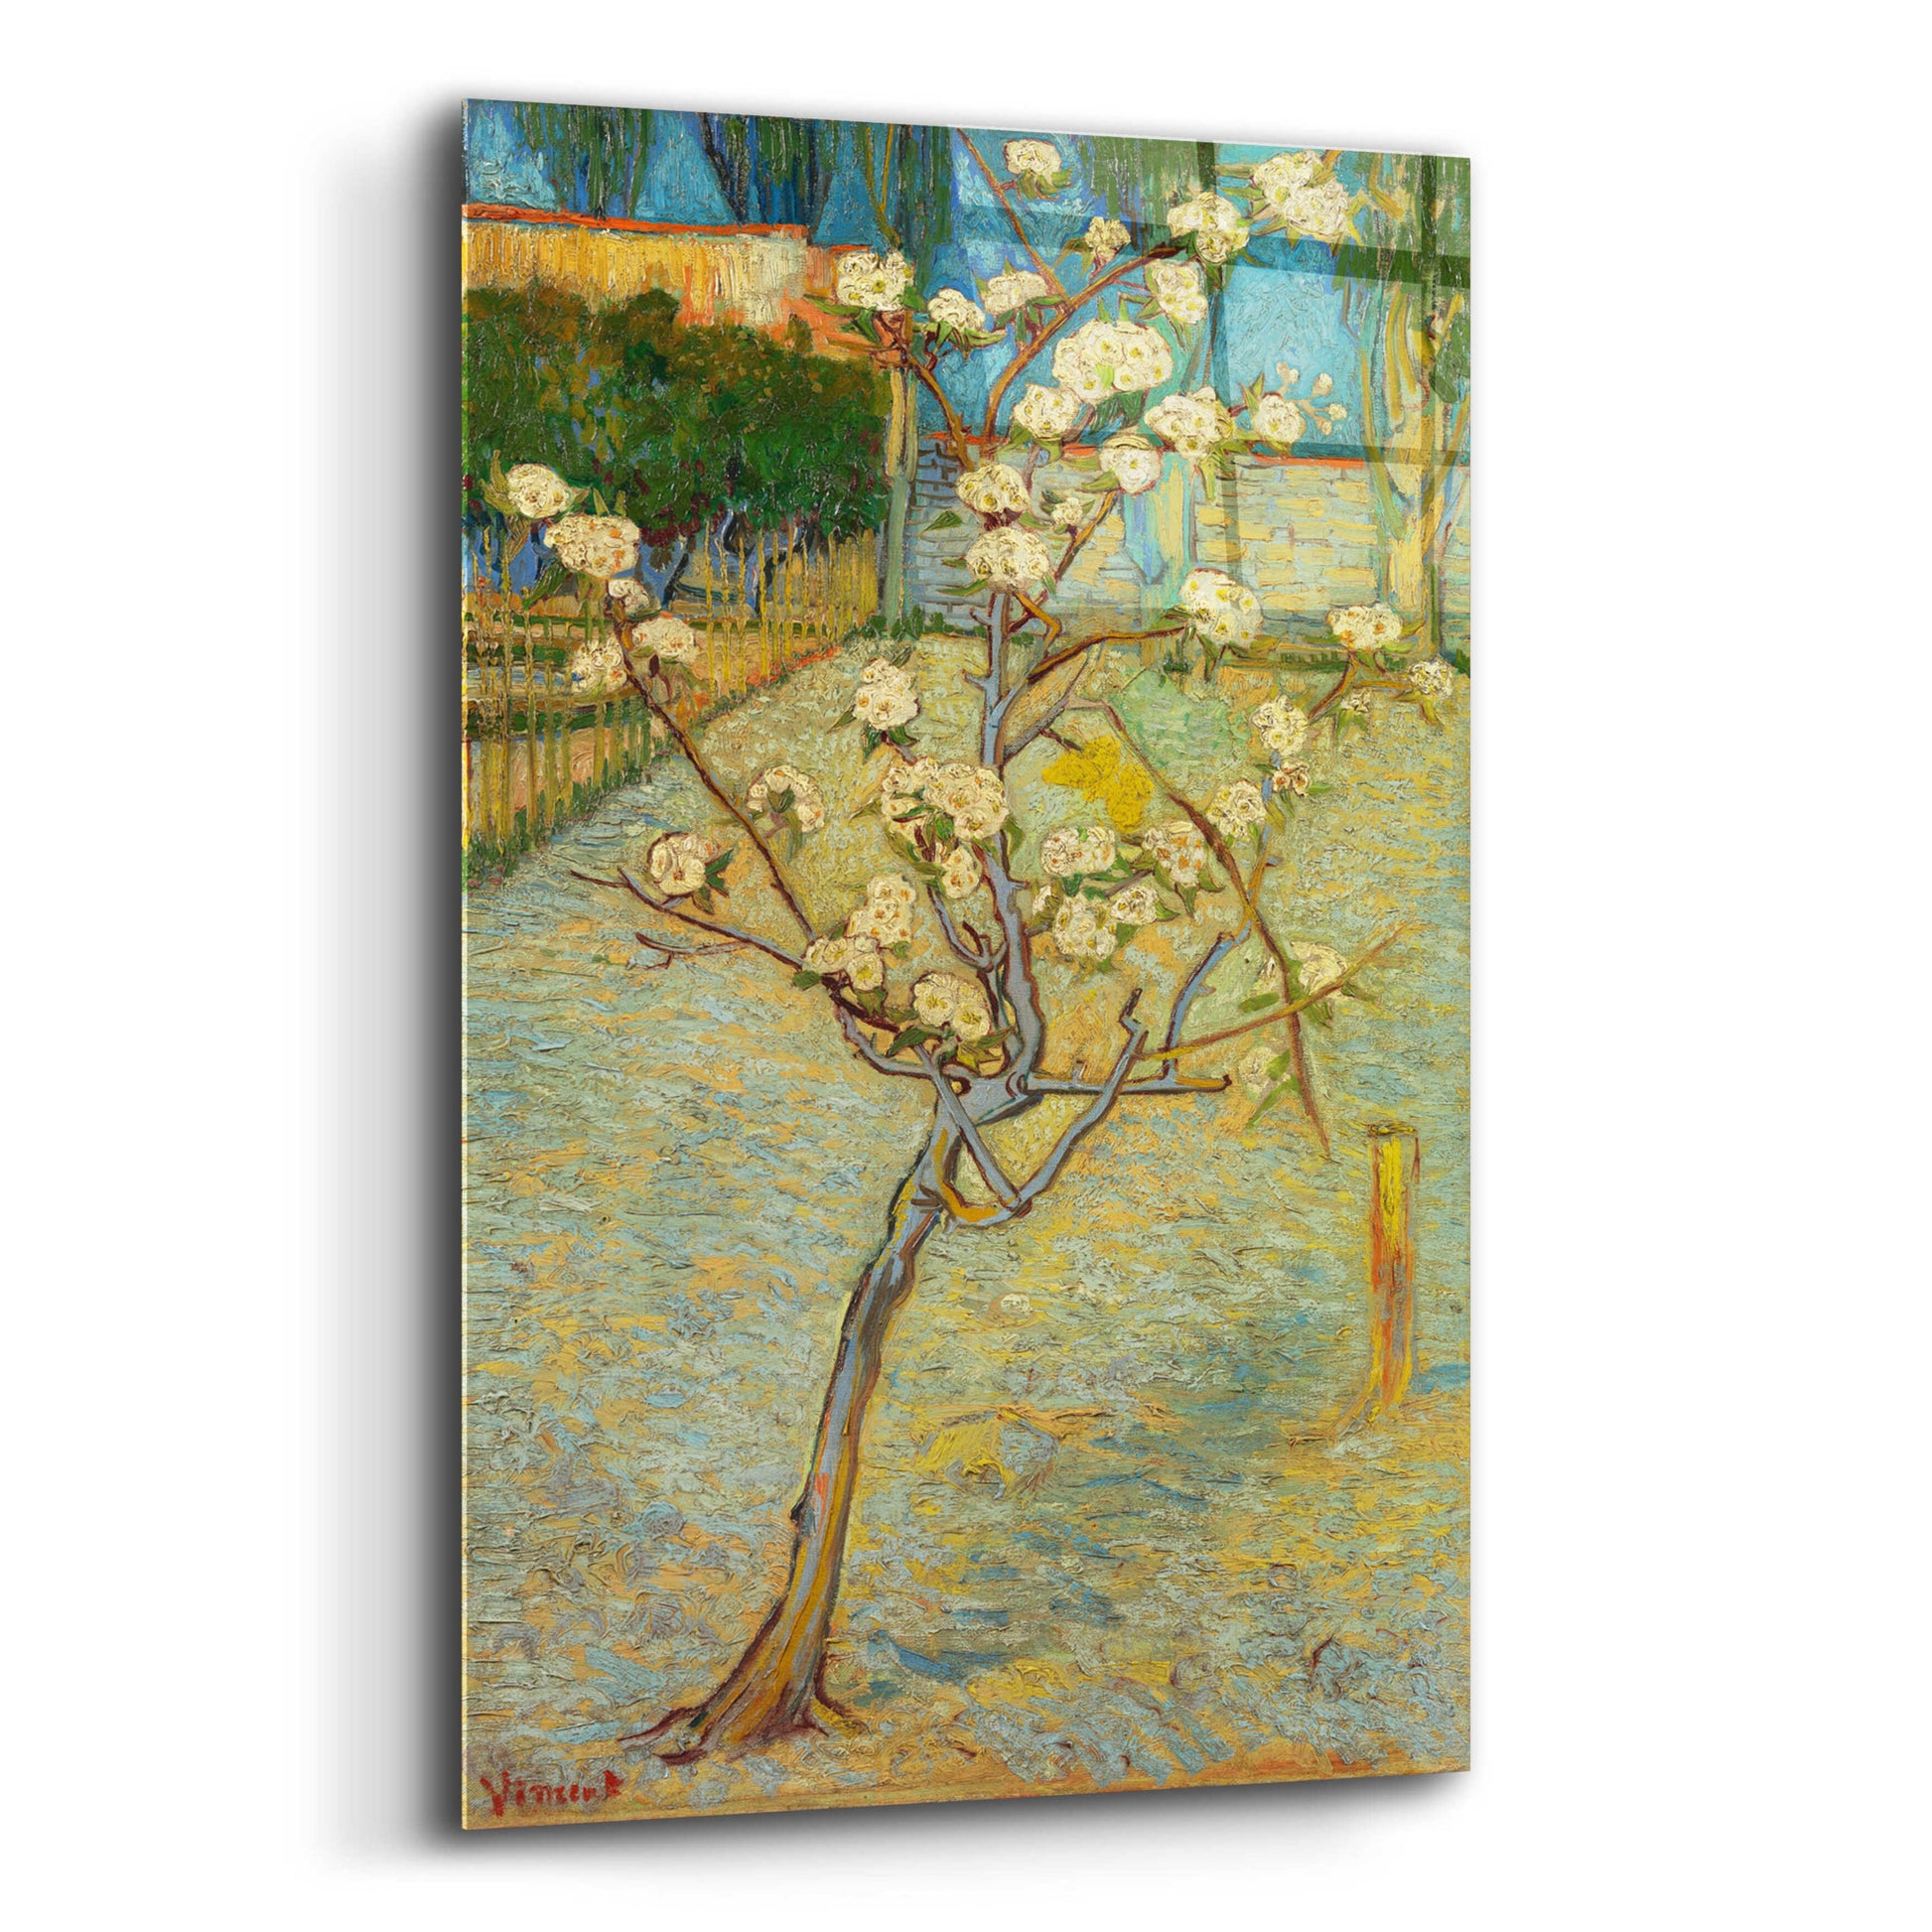 Epic Art 'Small Pear Tree In Blossom' by Vincent Van Gogh, Acrylic Glass Wall Art,12x16